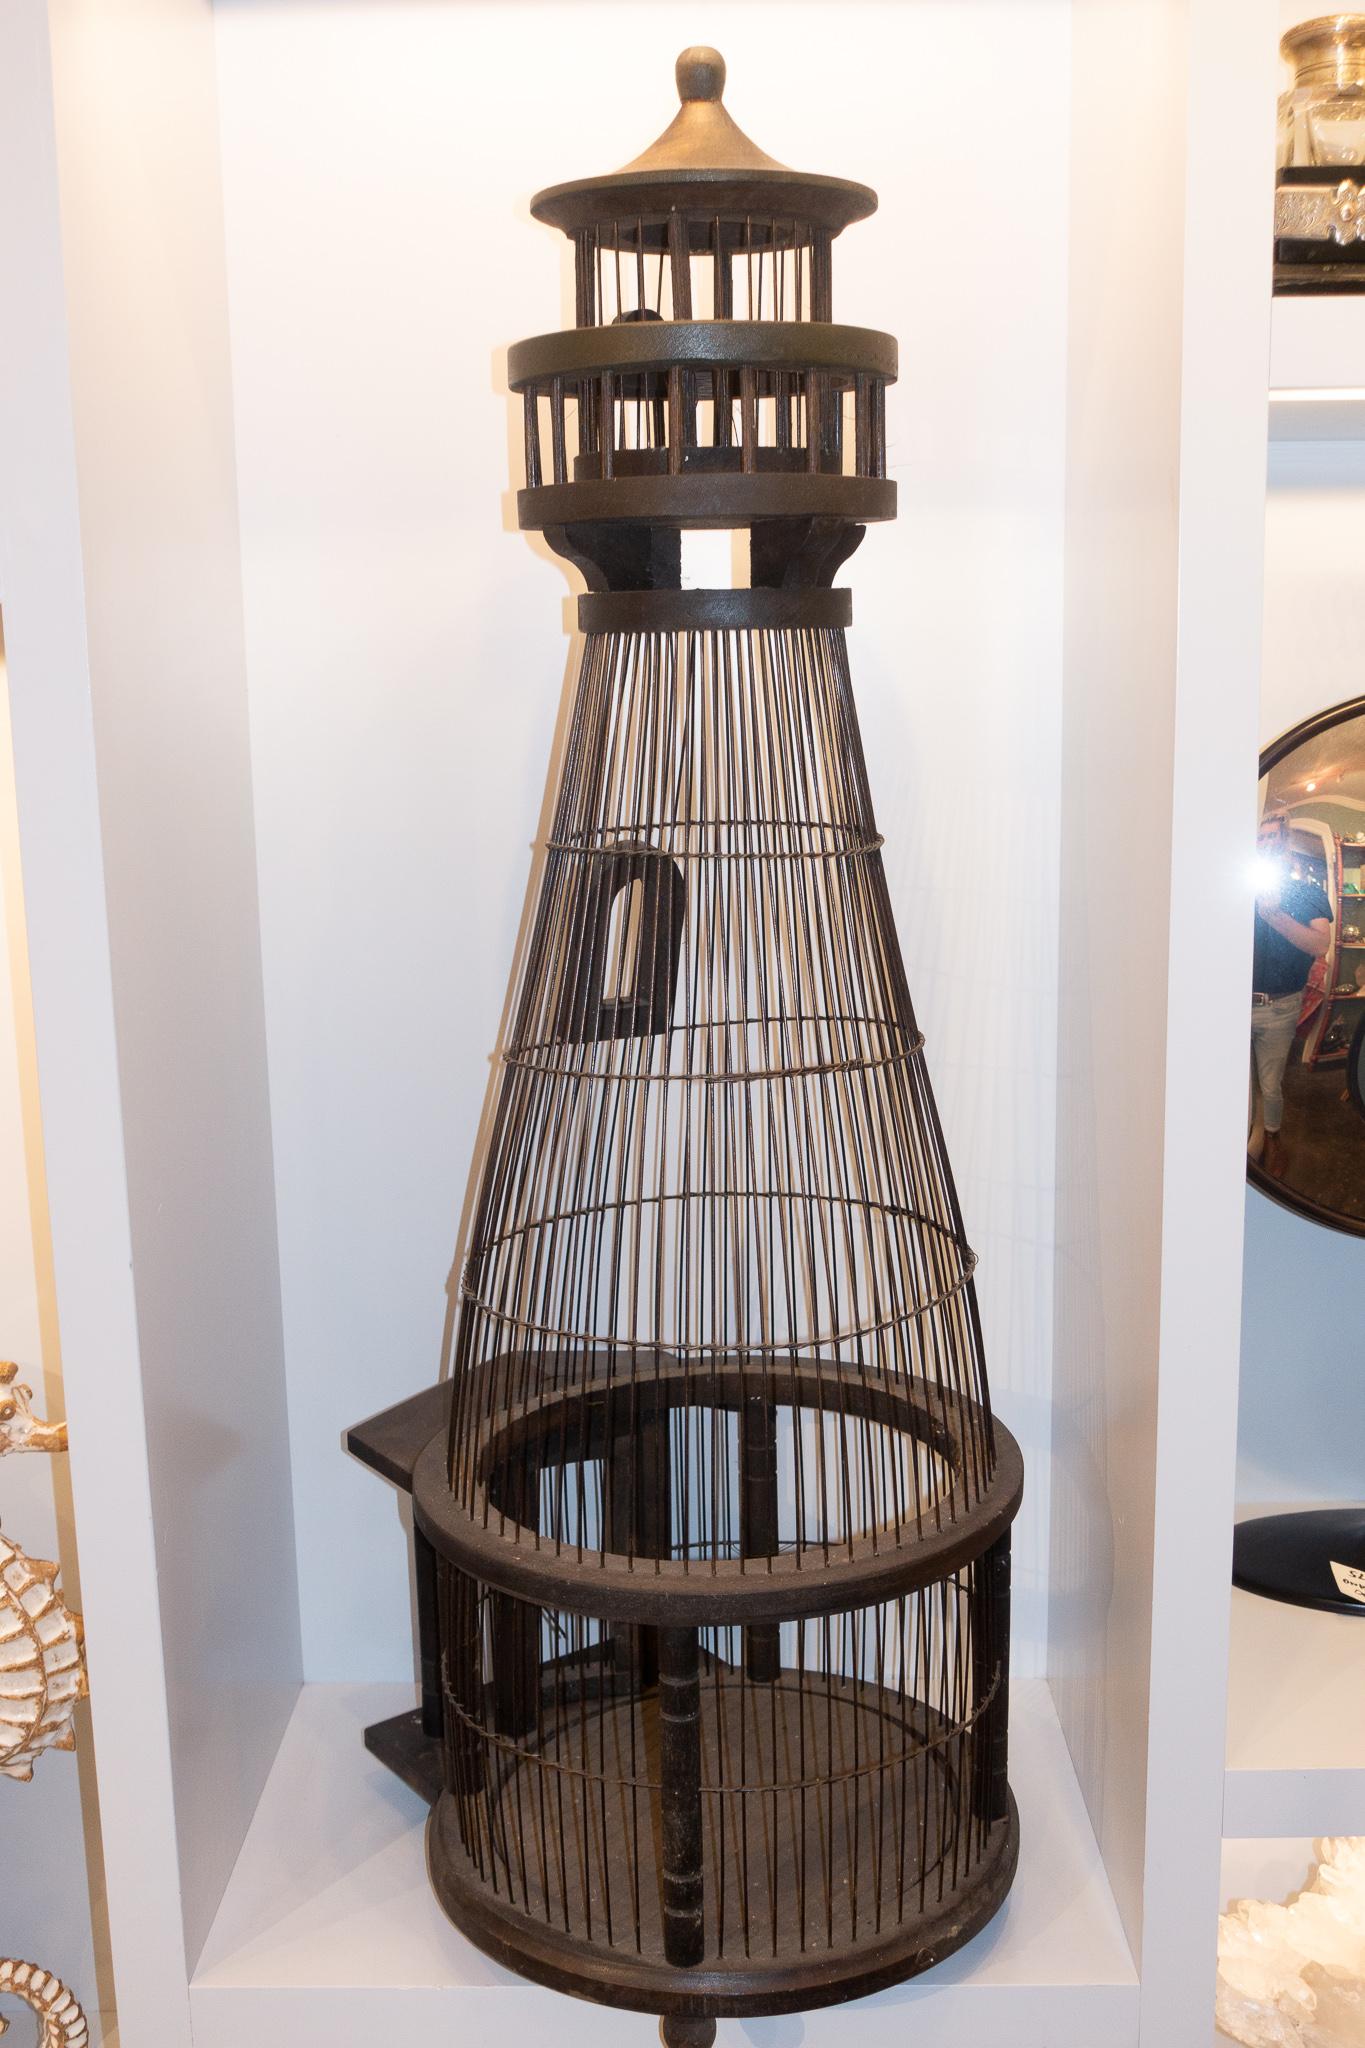 Charming large birdcage. Perfect summer home for your pet bird (lighthouse attendant) or just a beautiful architectural conversation piece.